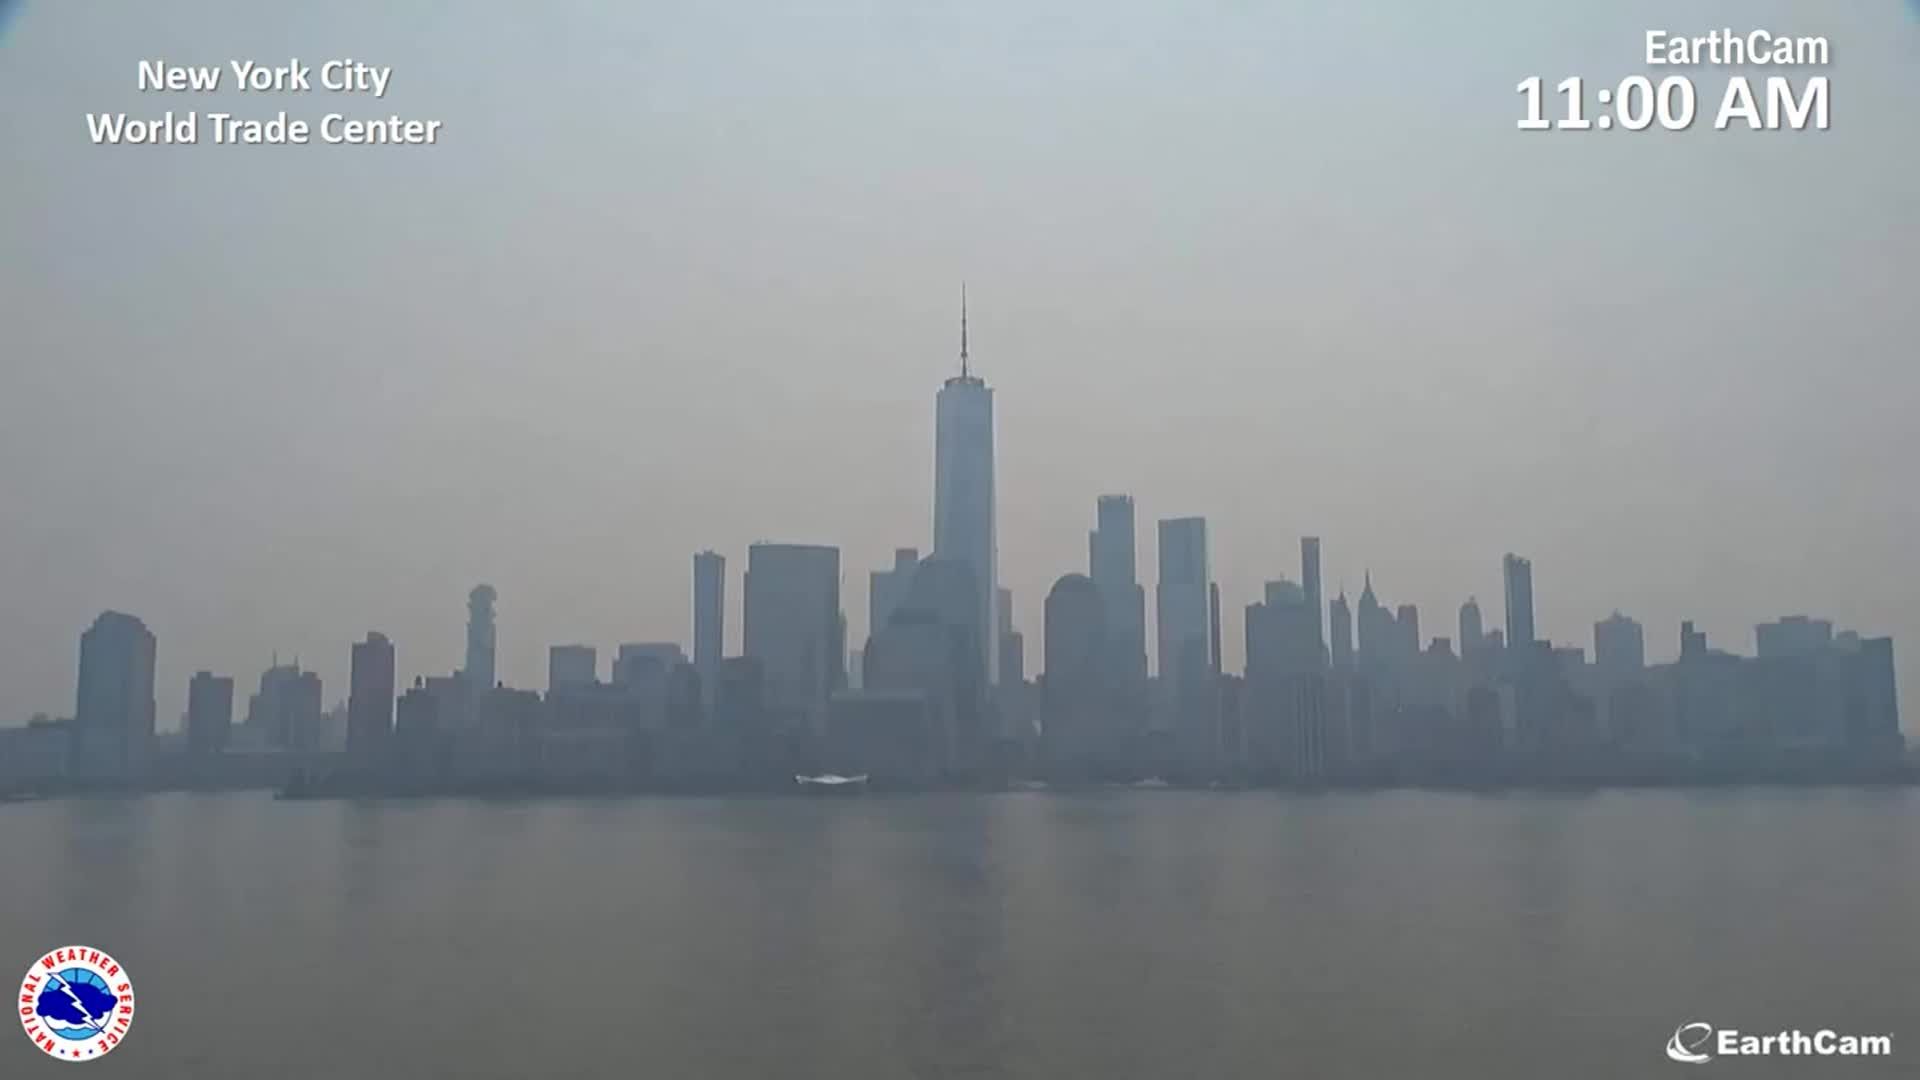 Timelapse video shows smoke engulfing NYC over a 3-hour period